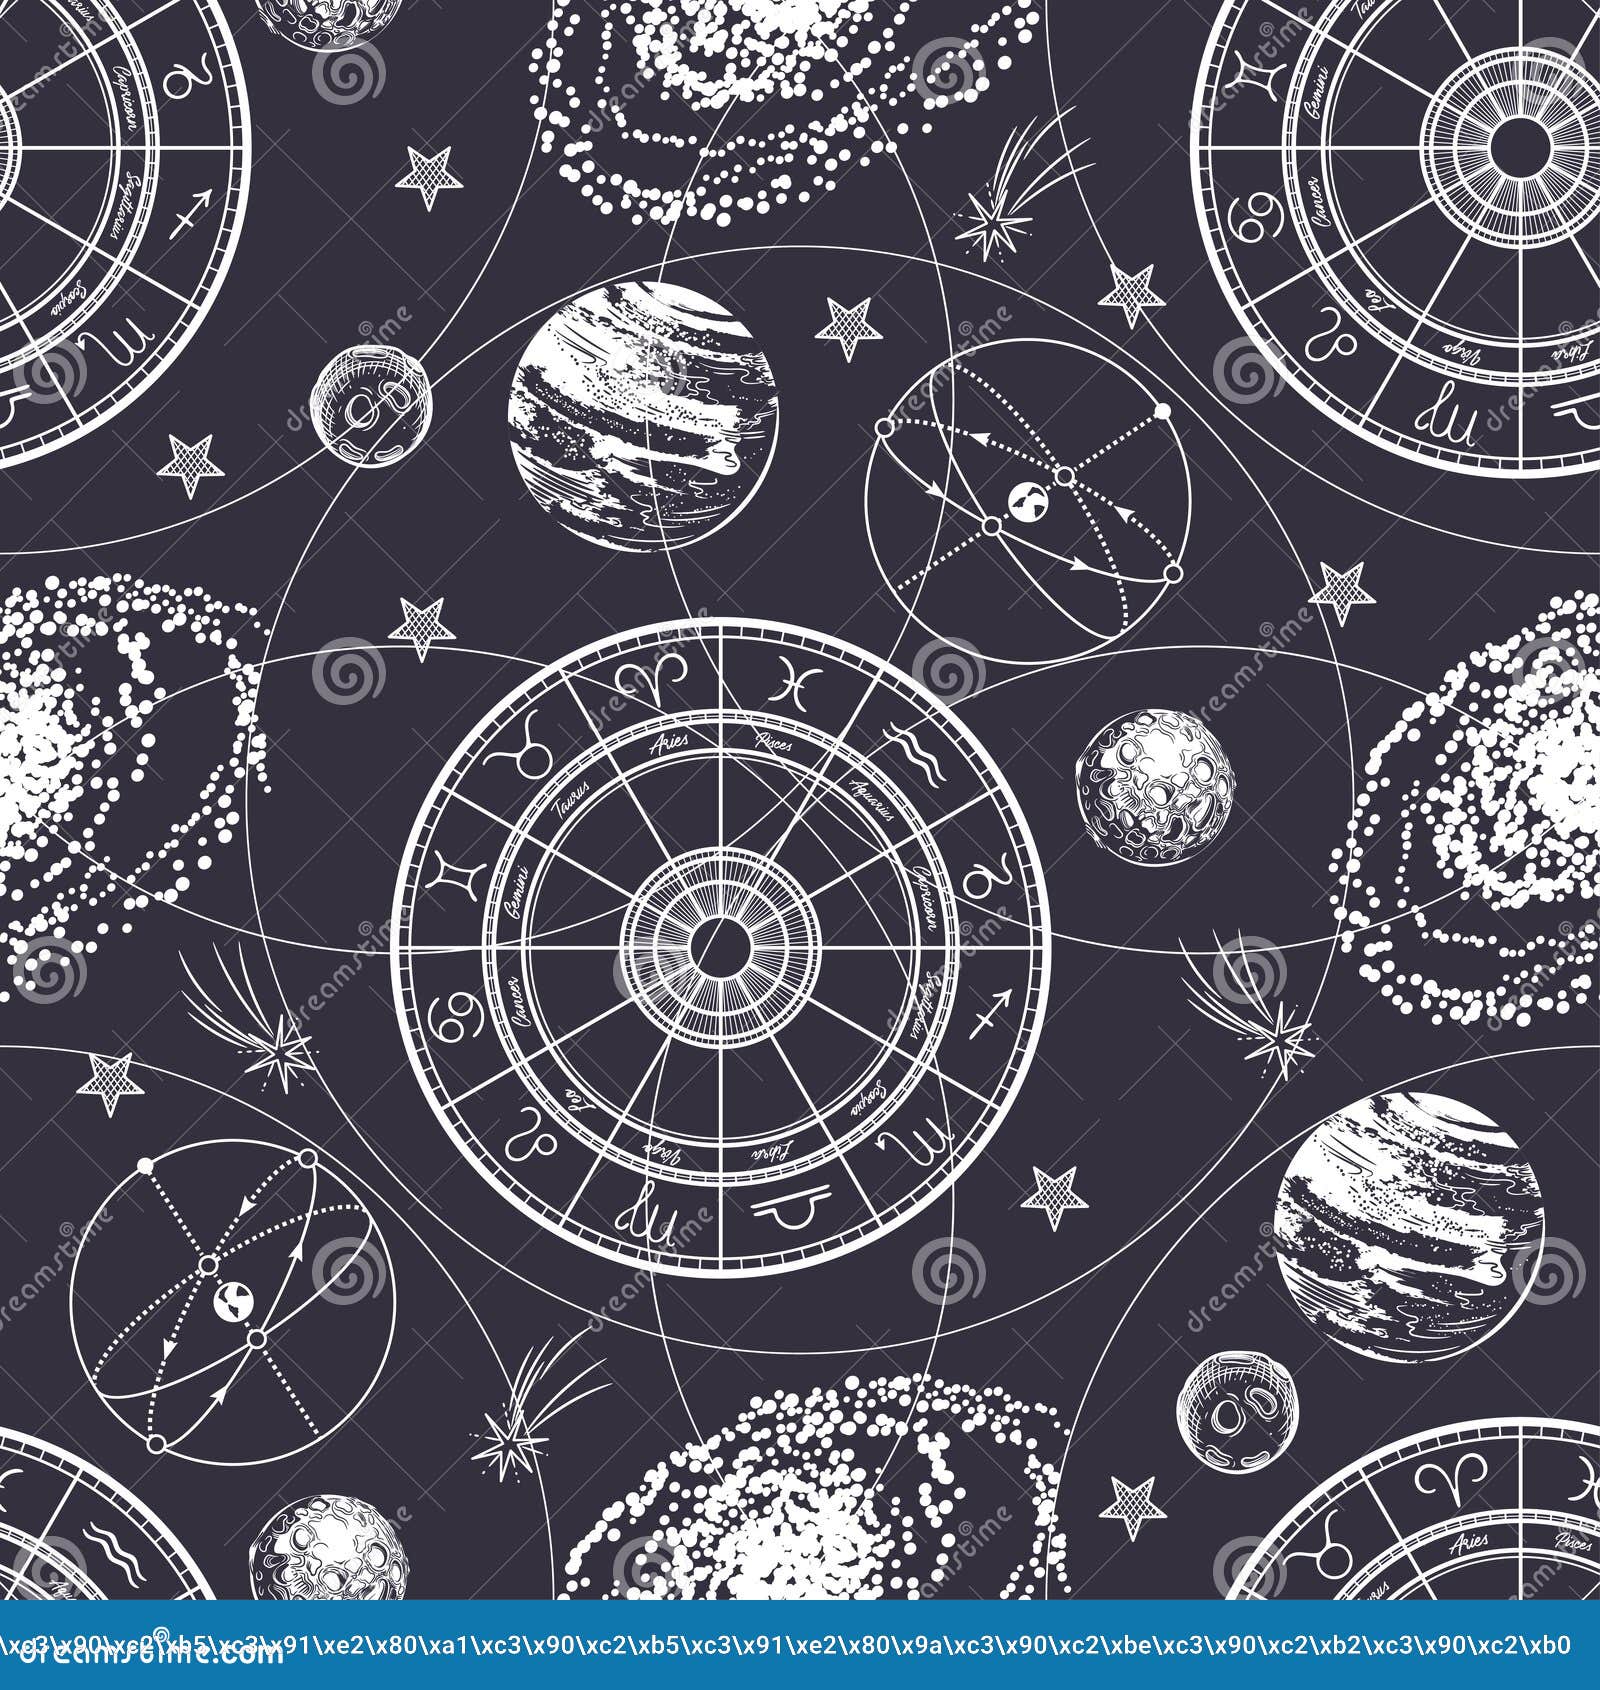 seamless pattern. signs of the zodiac, ecliptic, stars, galaxies and planets.